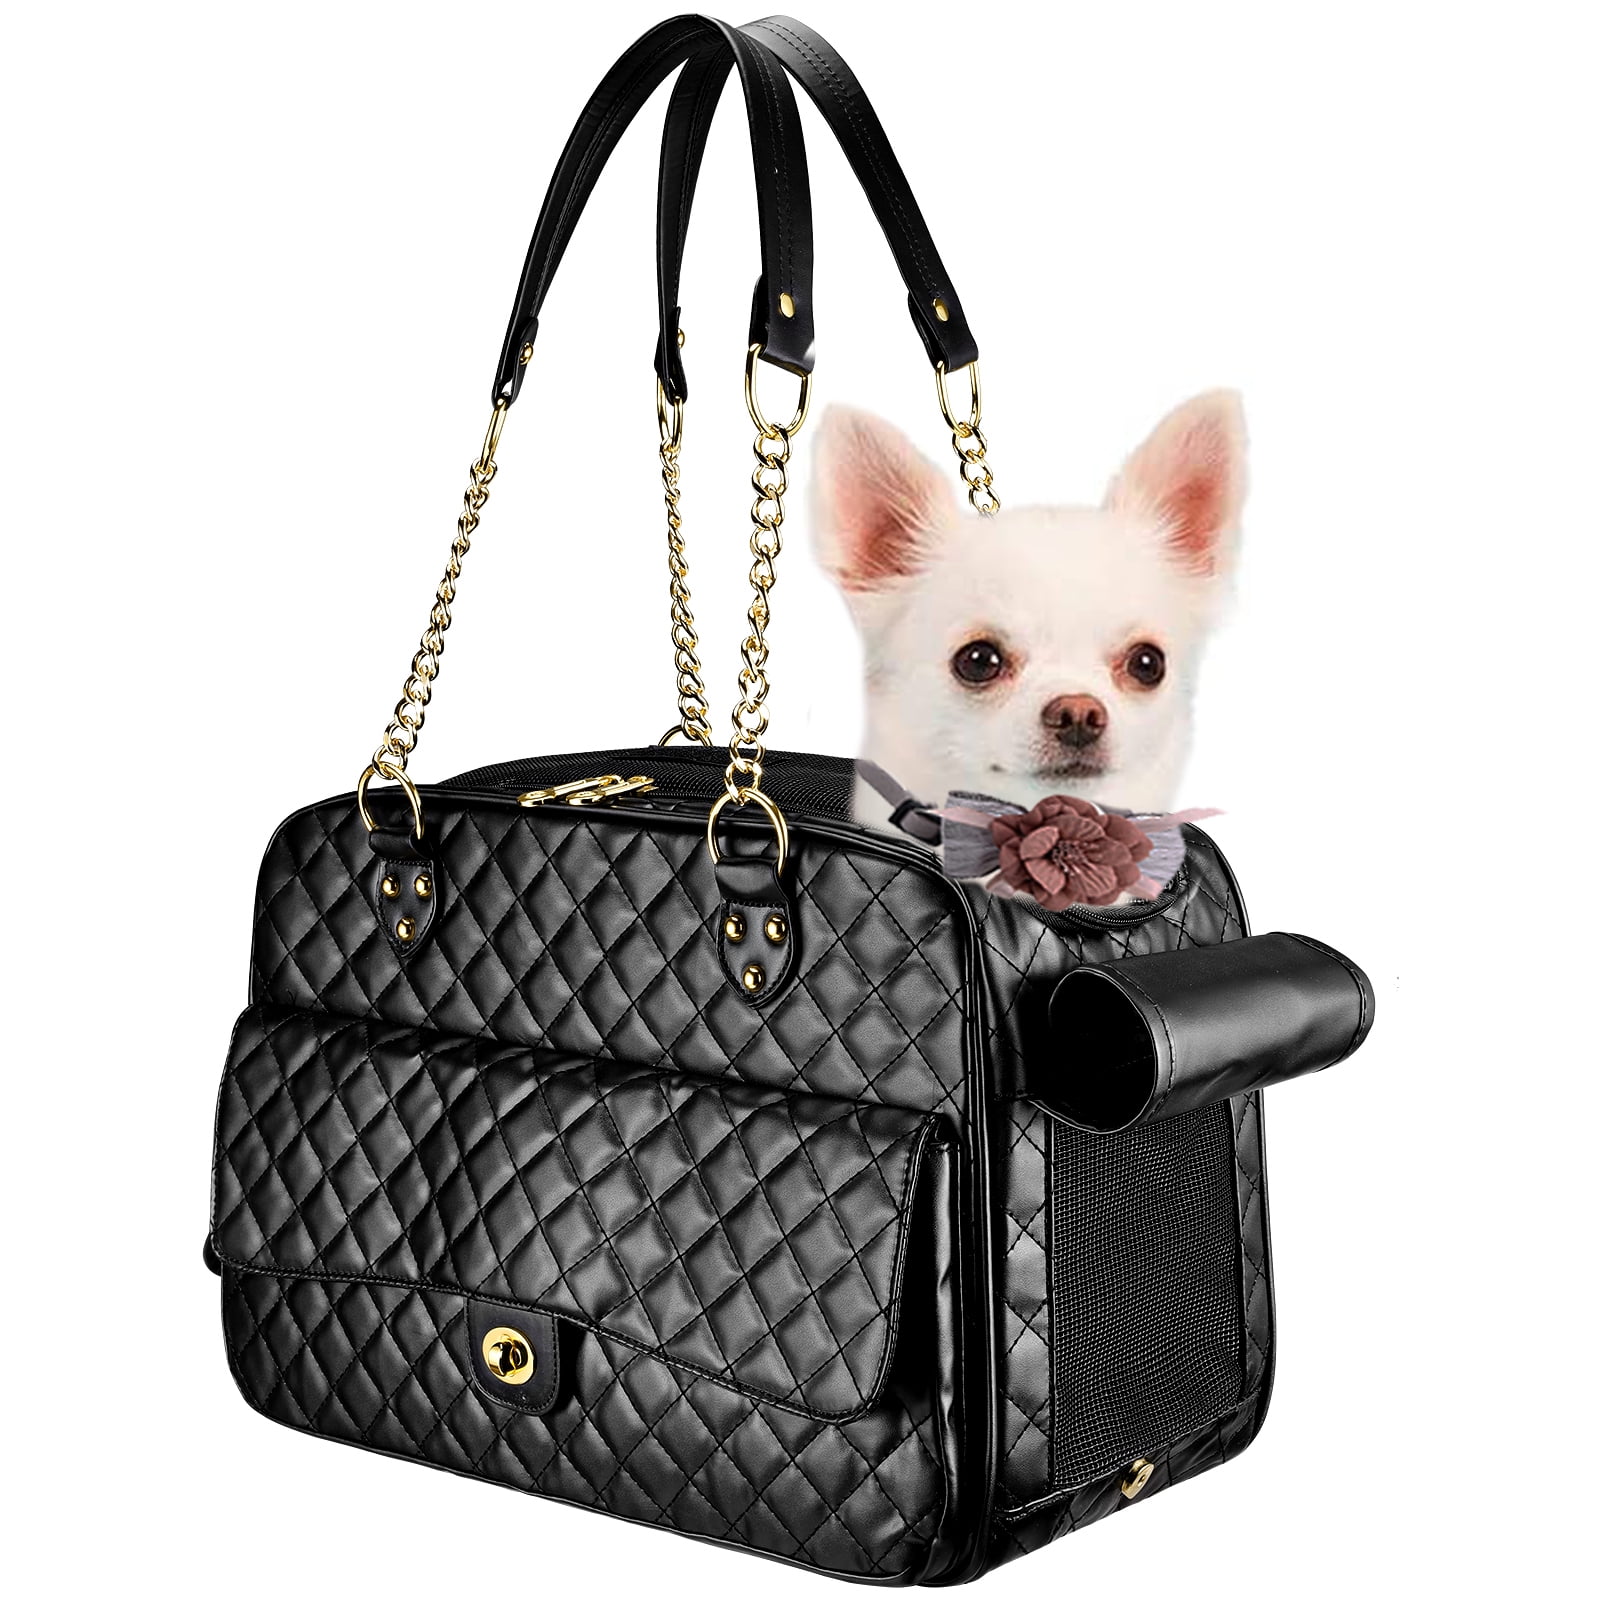 Fashion Dog Purse Carrier for Small Dogs with Large Pockets, Holds Up to  8lbs Quality PU leather Pet Carrier, Cat Carrier, Airline Approved Puppy Purse  Carrier for Travel (Black, Small Size) 